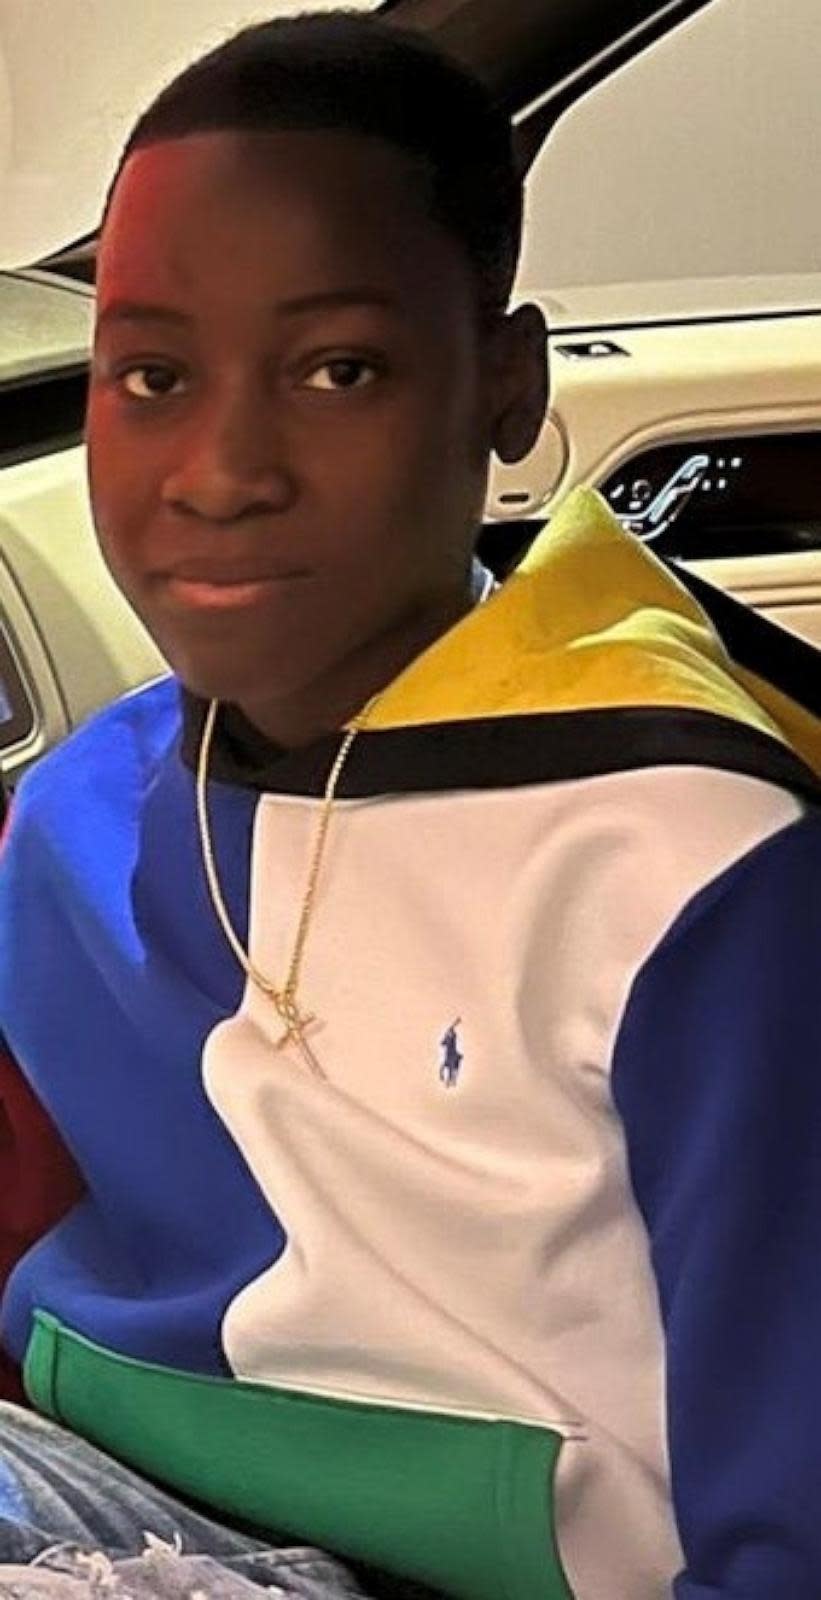 PHOTO: 16-year-old Justin Johnson had moved to the United States on January 2023 from Jamaica. Johnson died on April 26 when he suffered a cardiac arrest after allegedly playing a game of tag with other teens who appeared to have been targeting the teen. (Family Handout)